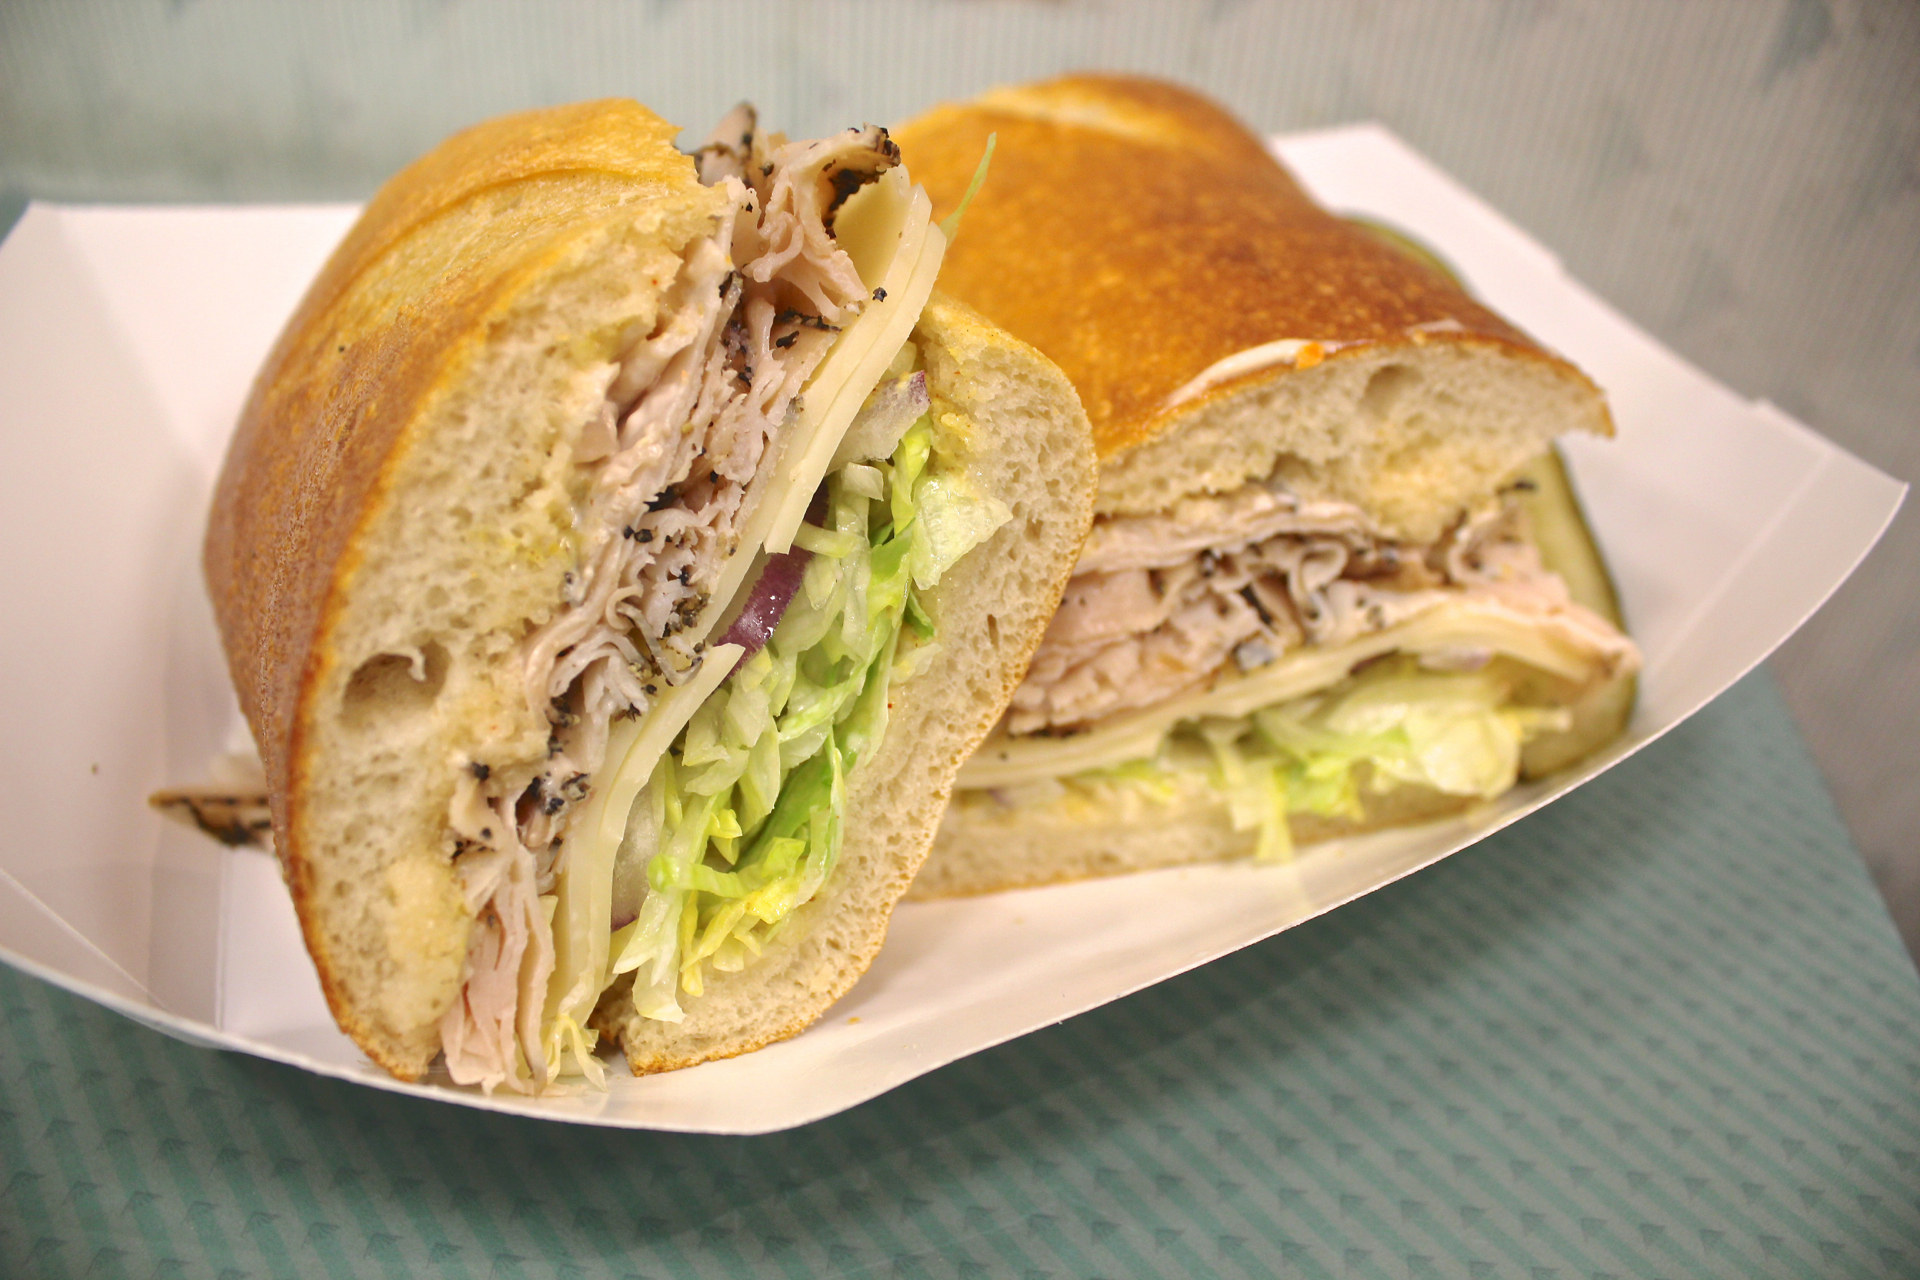 The peppered turkey sandwich at Freshly Baked Eatery.